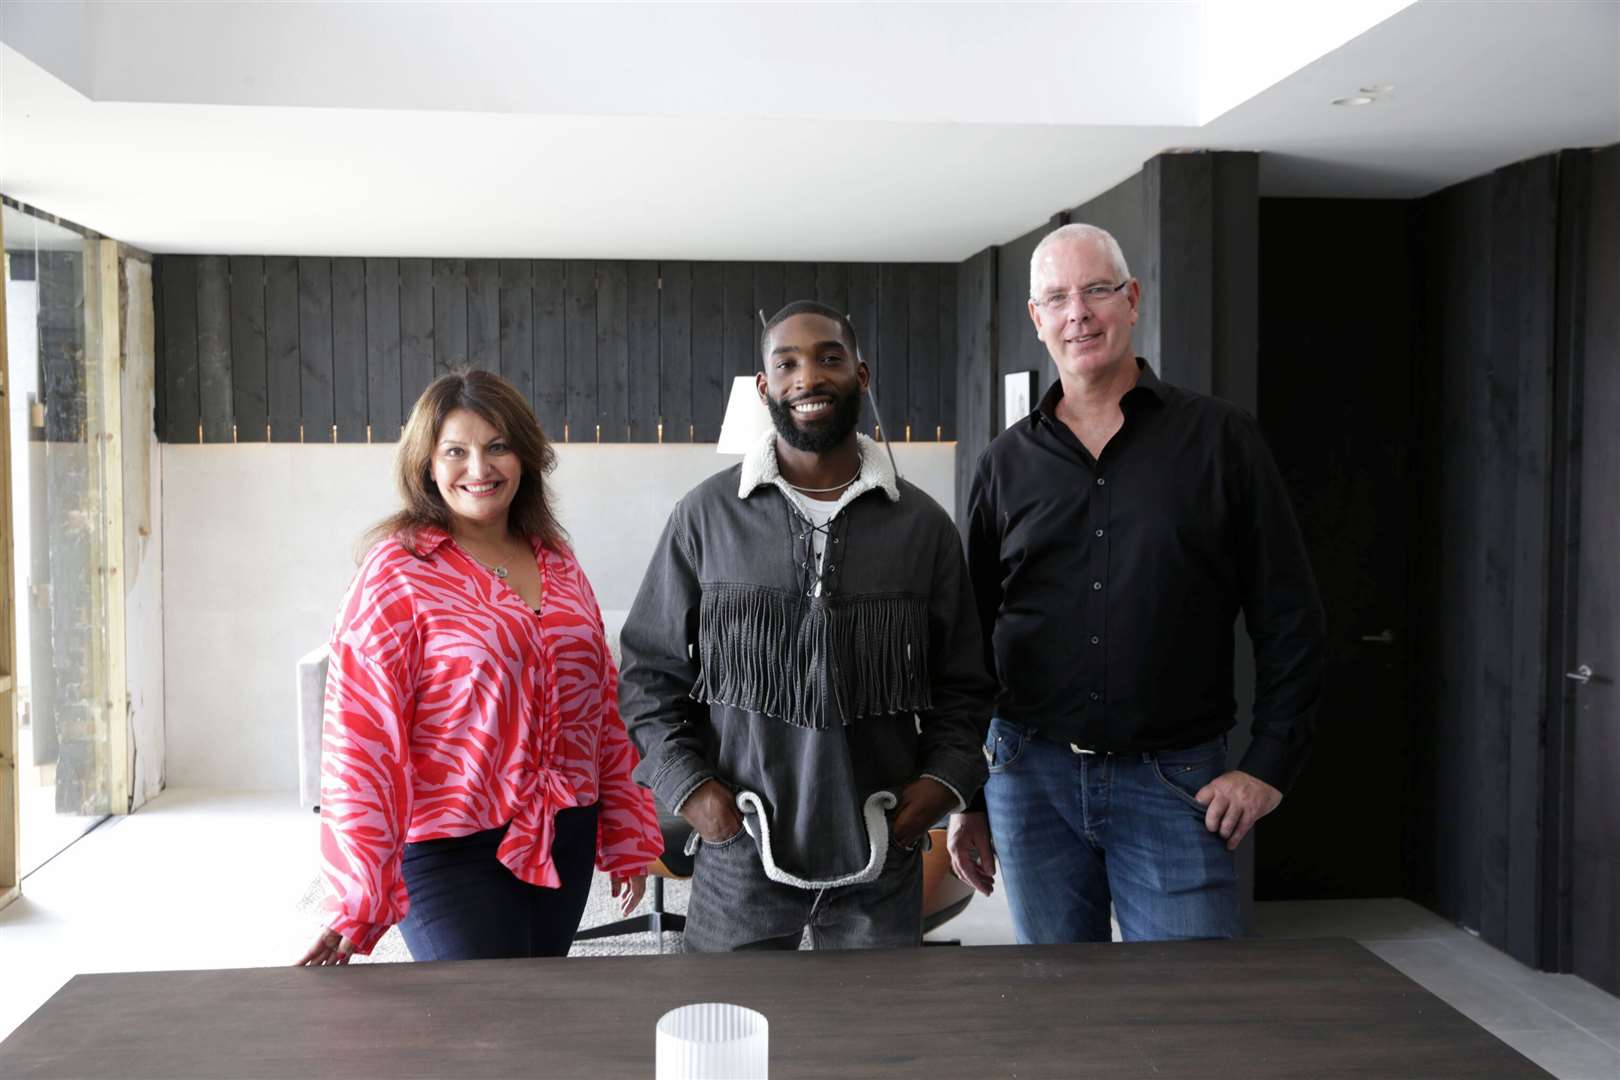 Tracey, Tinie Tempah and Jeff at the couple's home in Sandgate. Picture: Channel 4